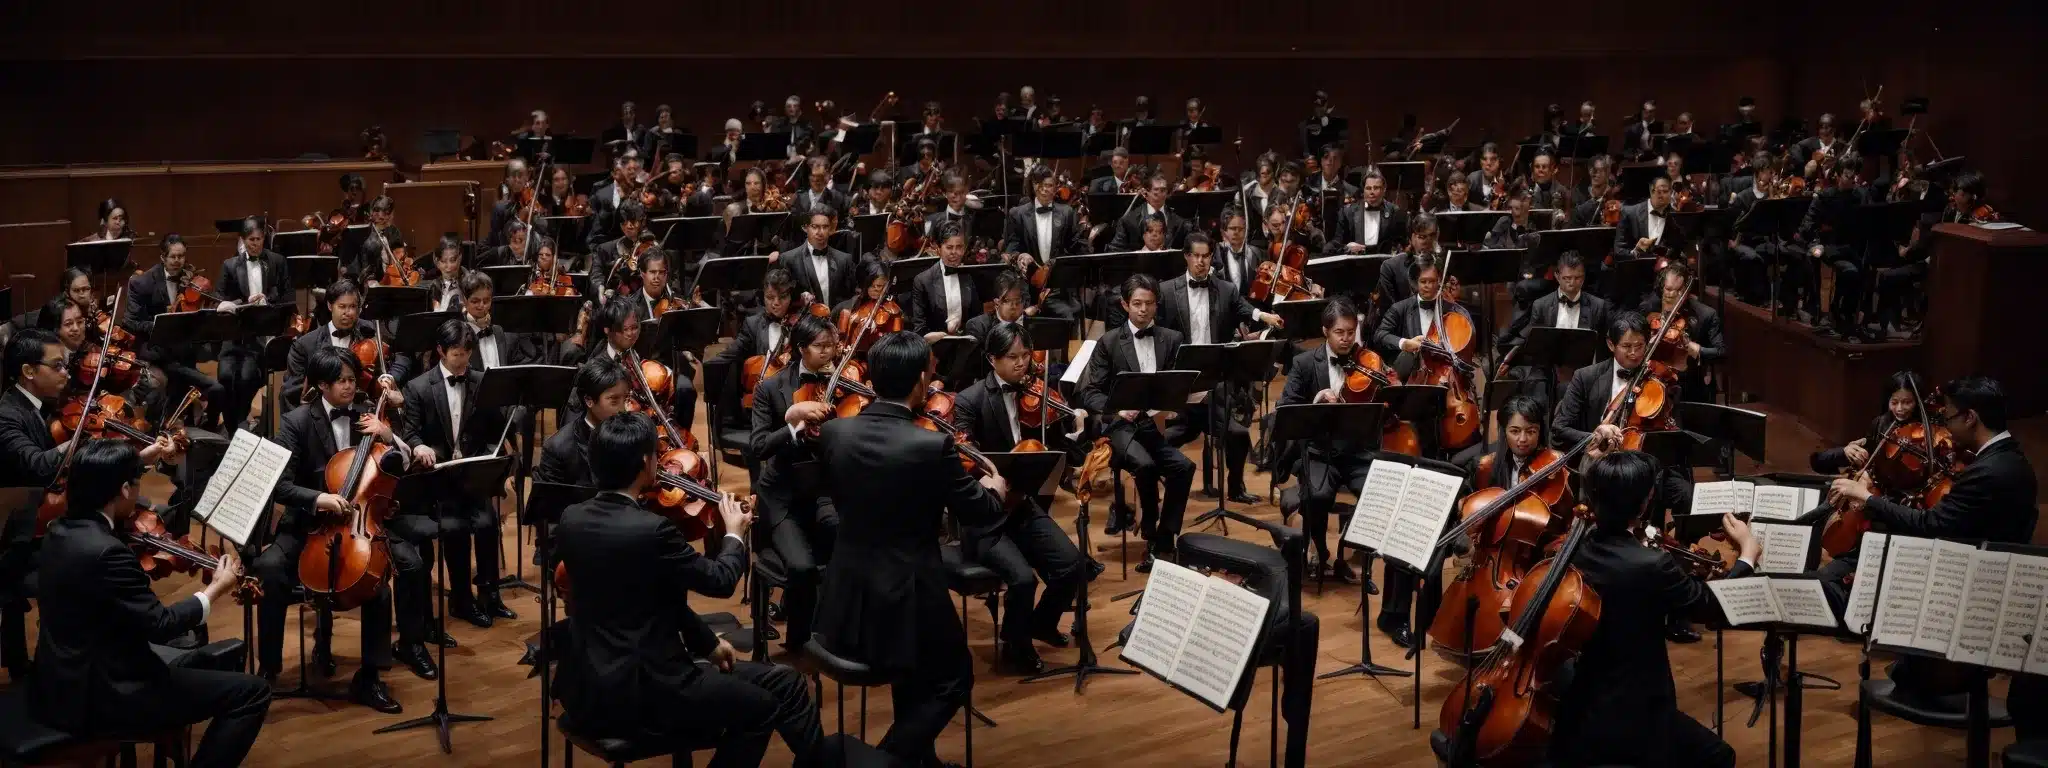 An Orchestra In Harmony With Every Instrument Section Expertly Coordinated Under The Guidance Of A Focused Conductor.